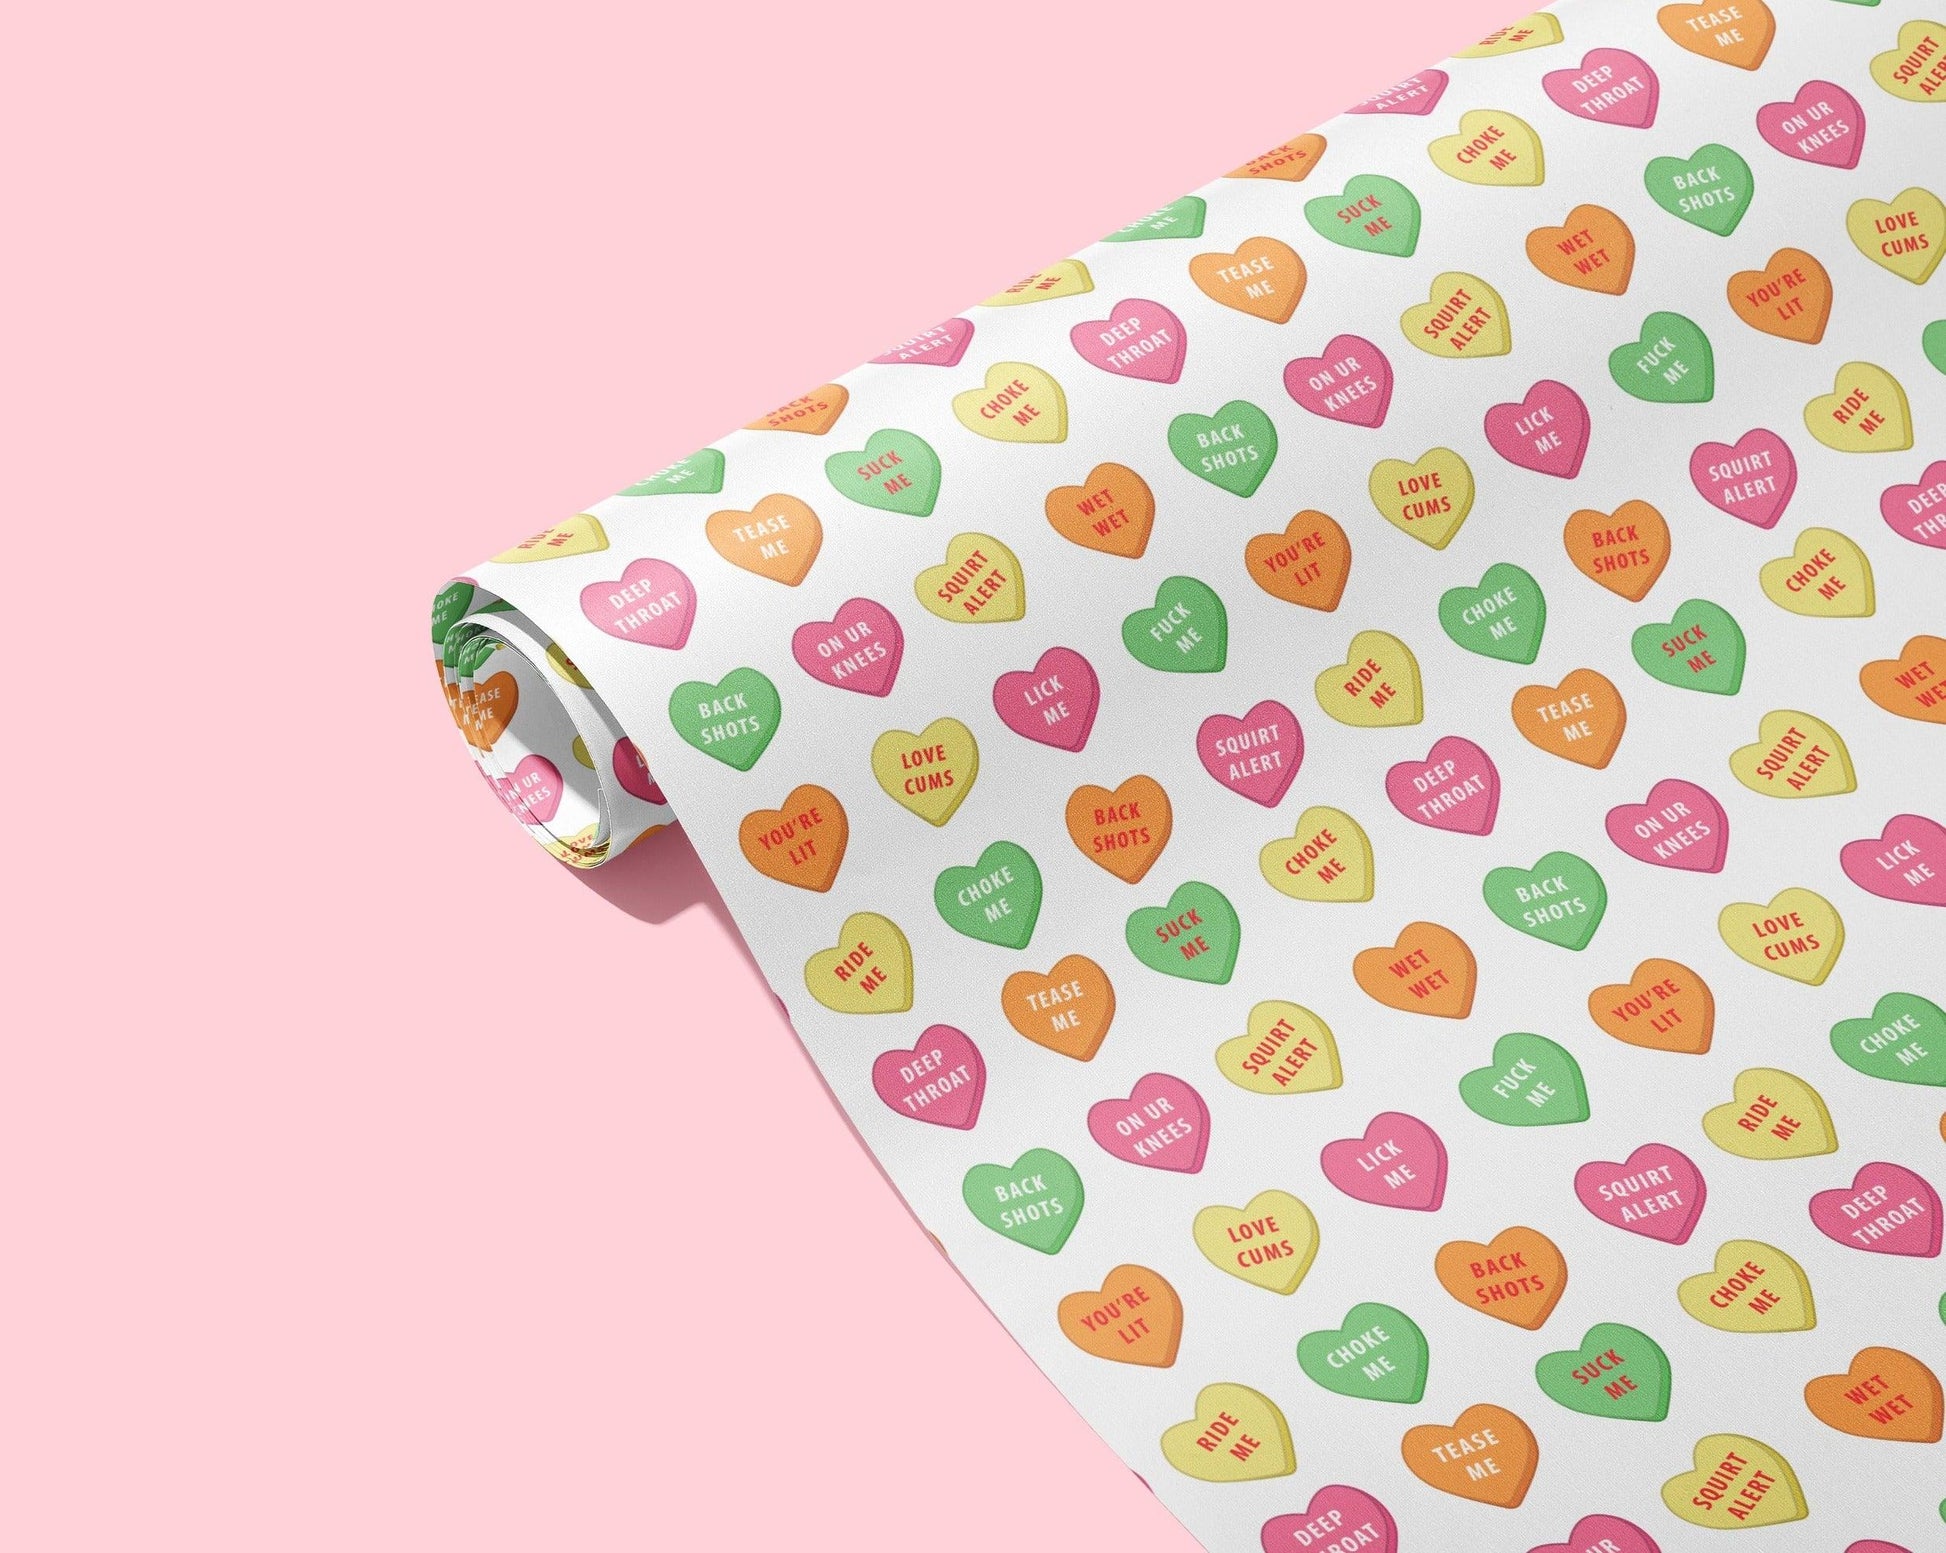 Sexy Sweeties Naughty Wrapping Paper - KushKards 22" x 29" wide and has 3 sheets per roll with naughty sweat heart sayings pattern 